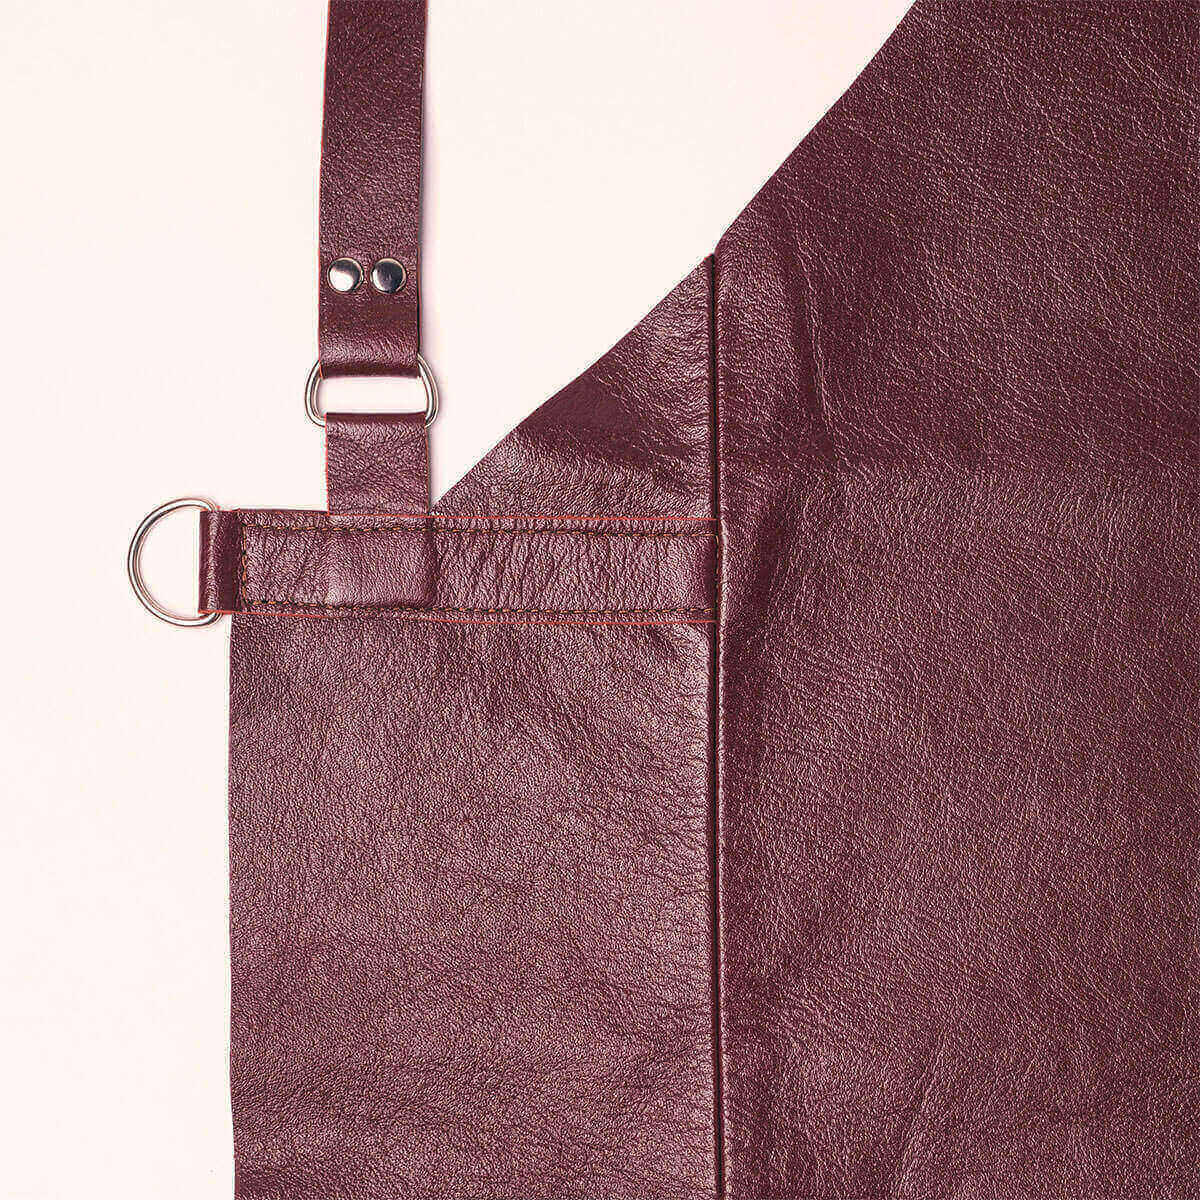 Deluxe Leather Apron (Burgundy)